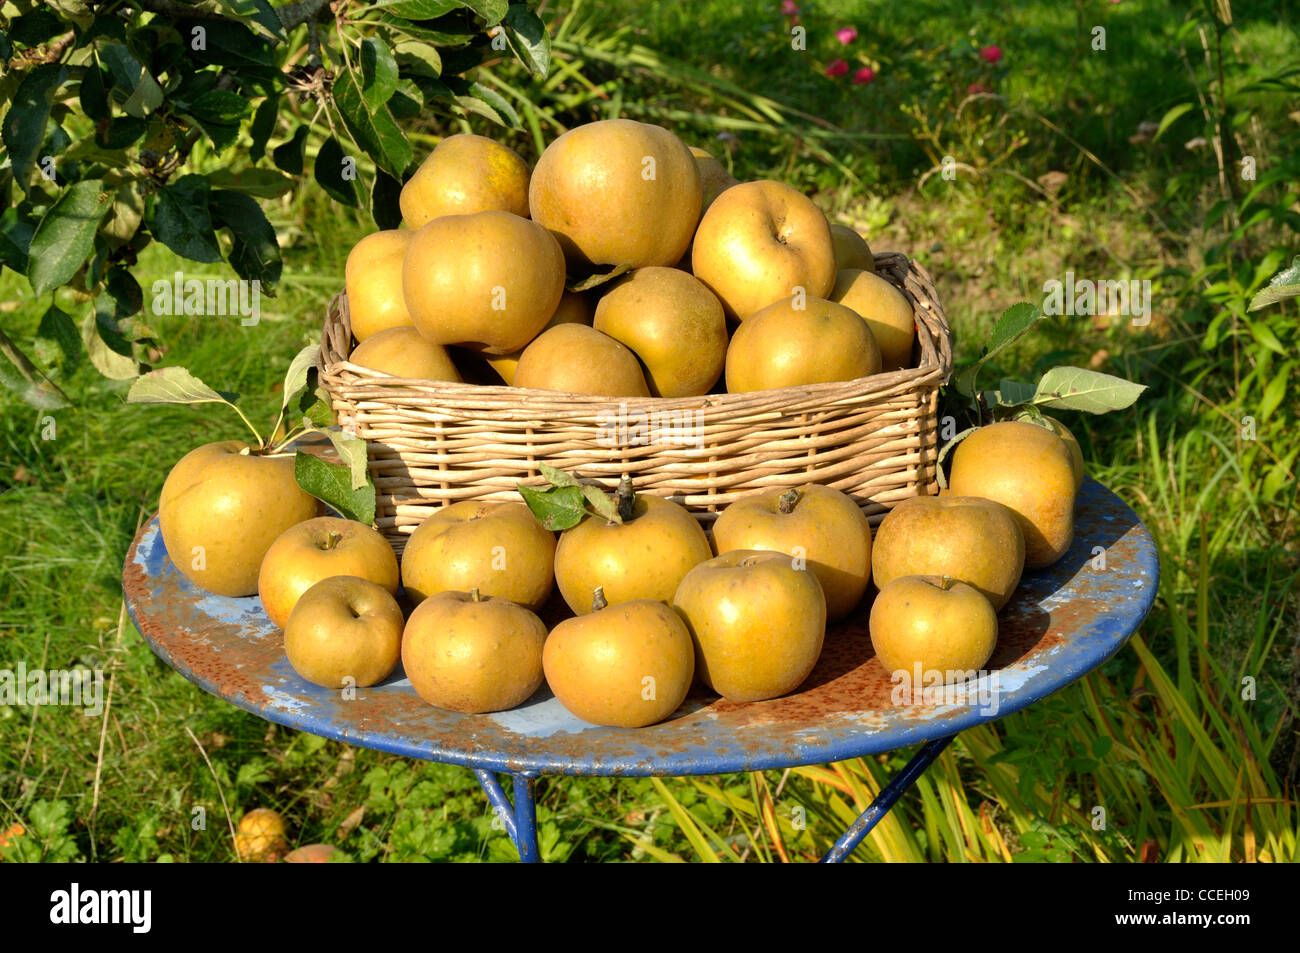 Russet  apples (Reinette Grise du Canada)  on the garden table. Stock Photo